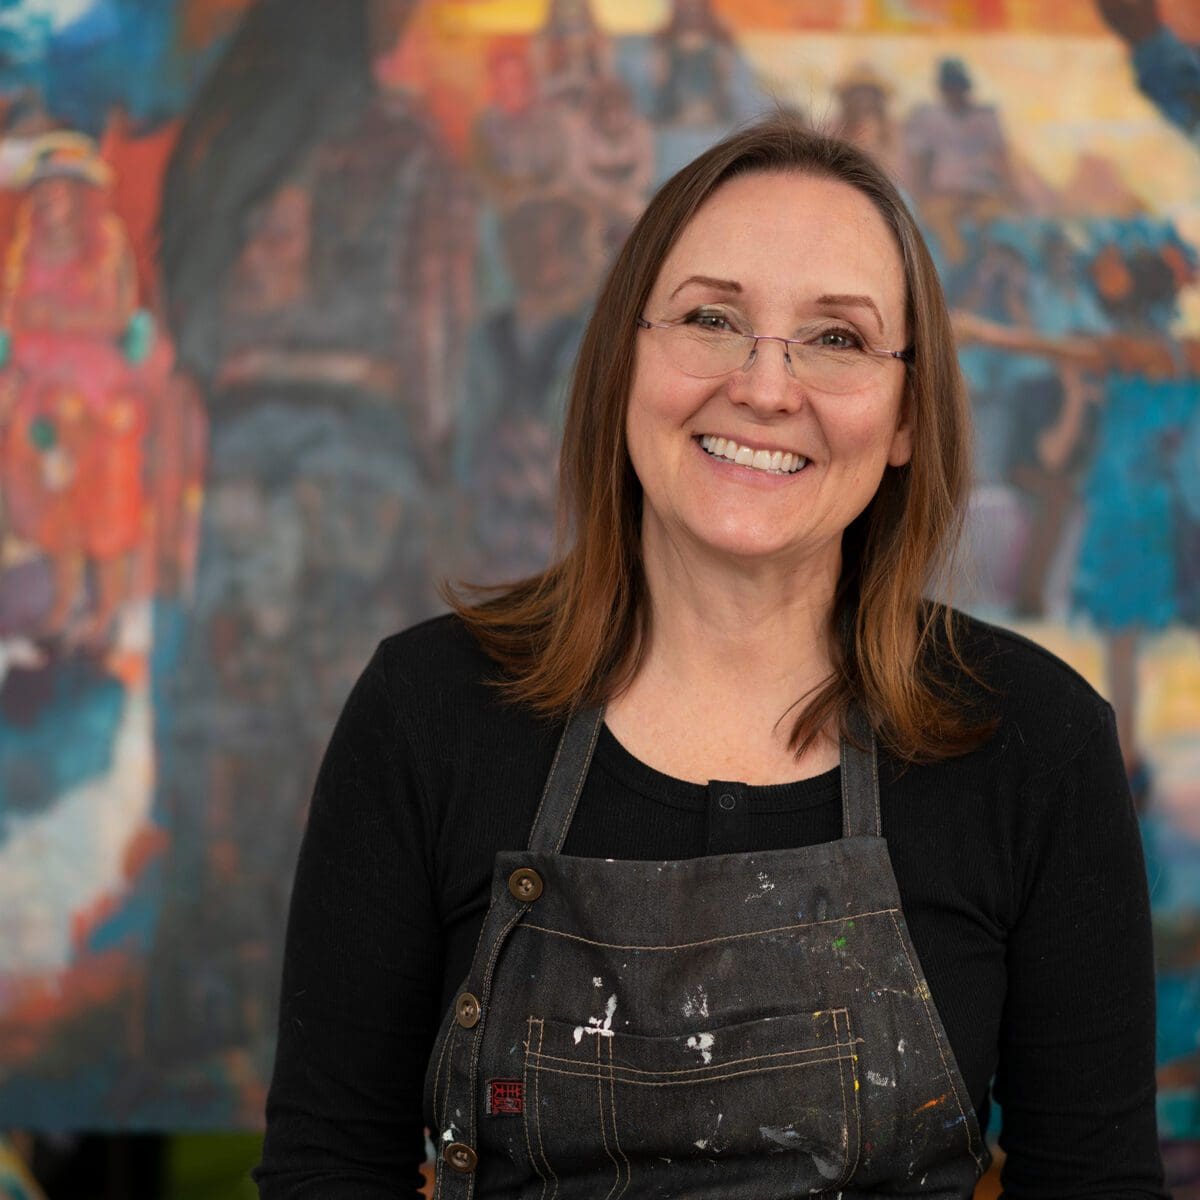 Anette Power, wearing glasses and a paint-stained apron, smiles in front of a colorful, abstract painting.